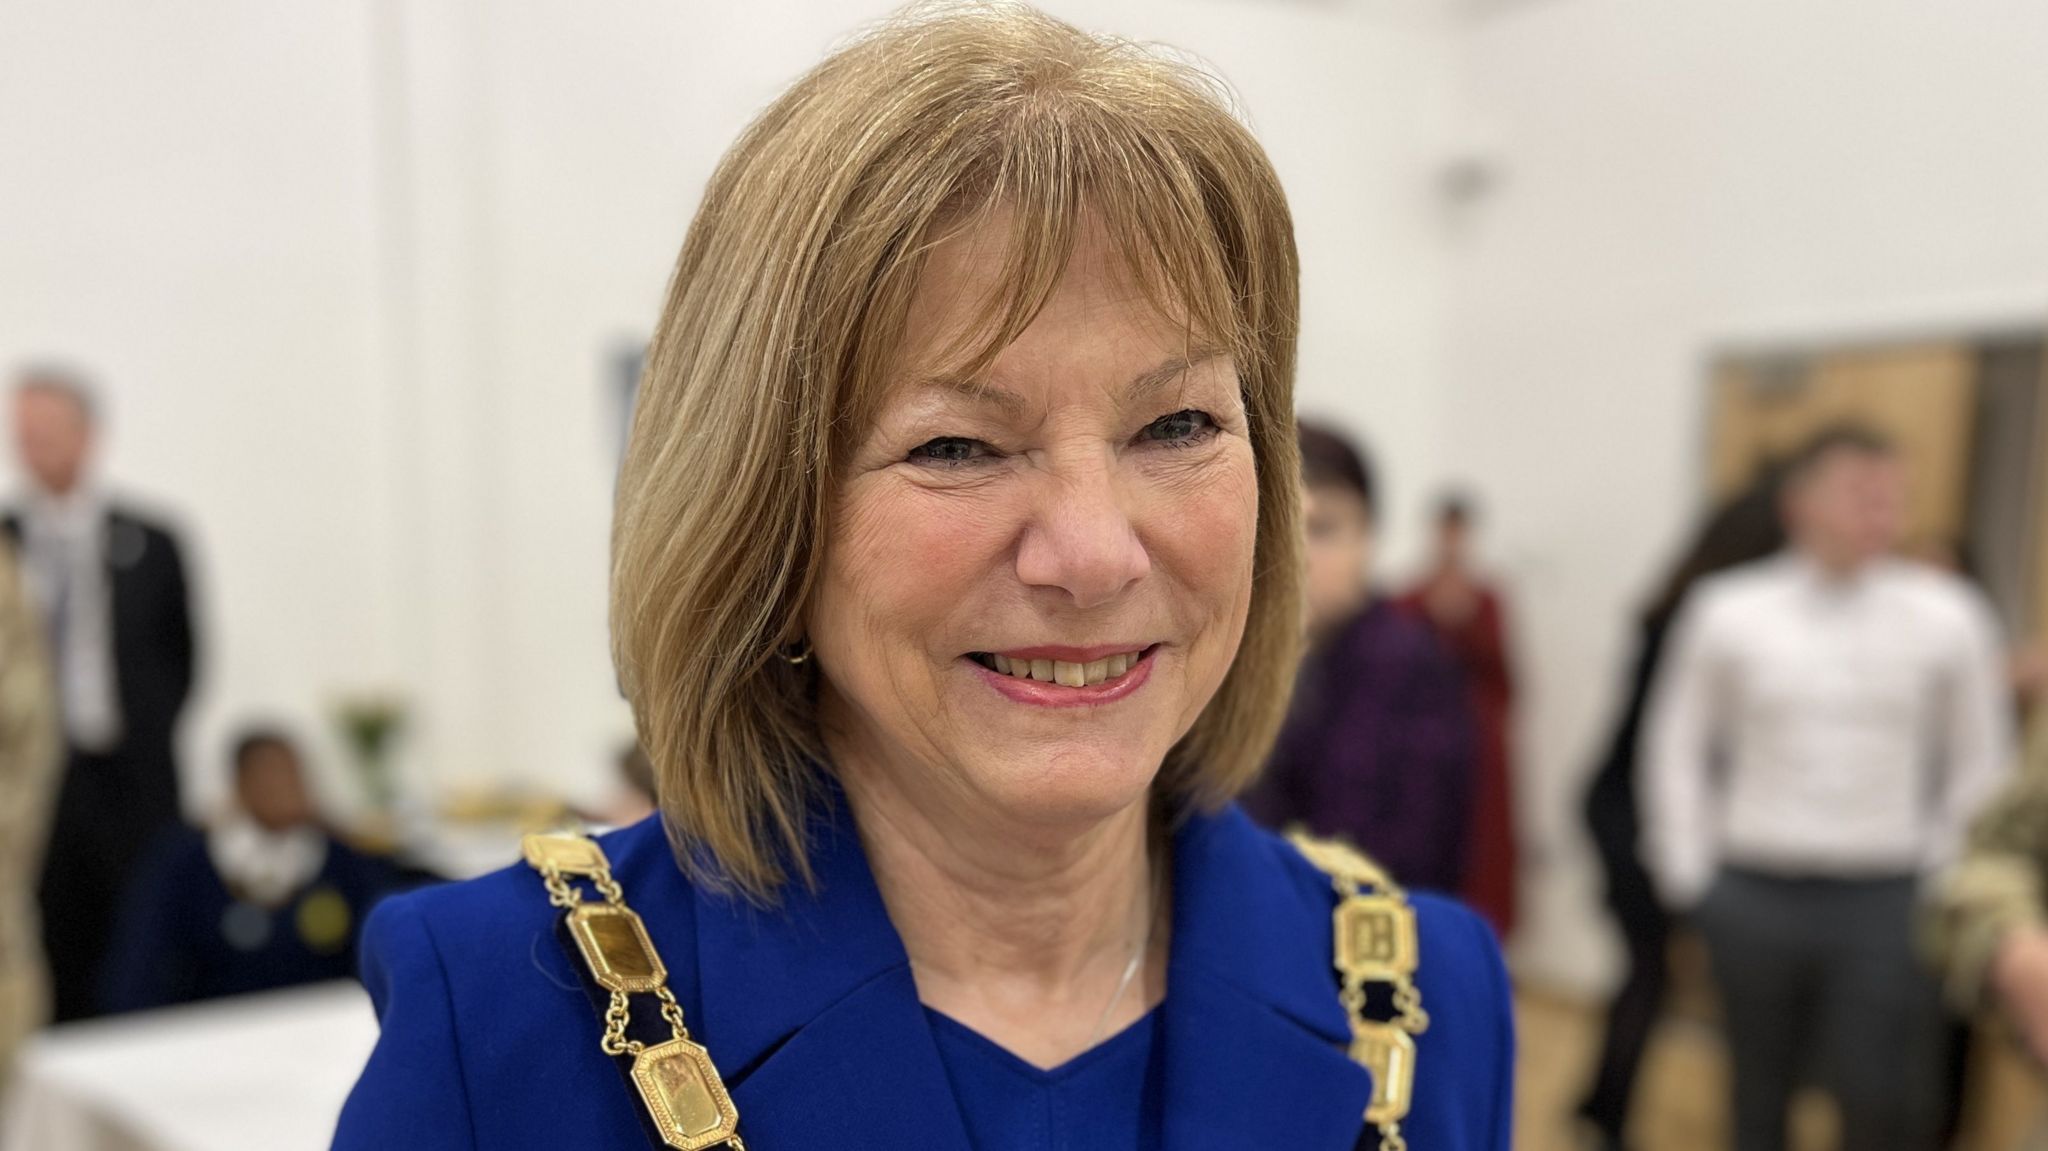 Mayor of Tidworth, Carole Webb, wearing a blue suit and the mayoral chain